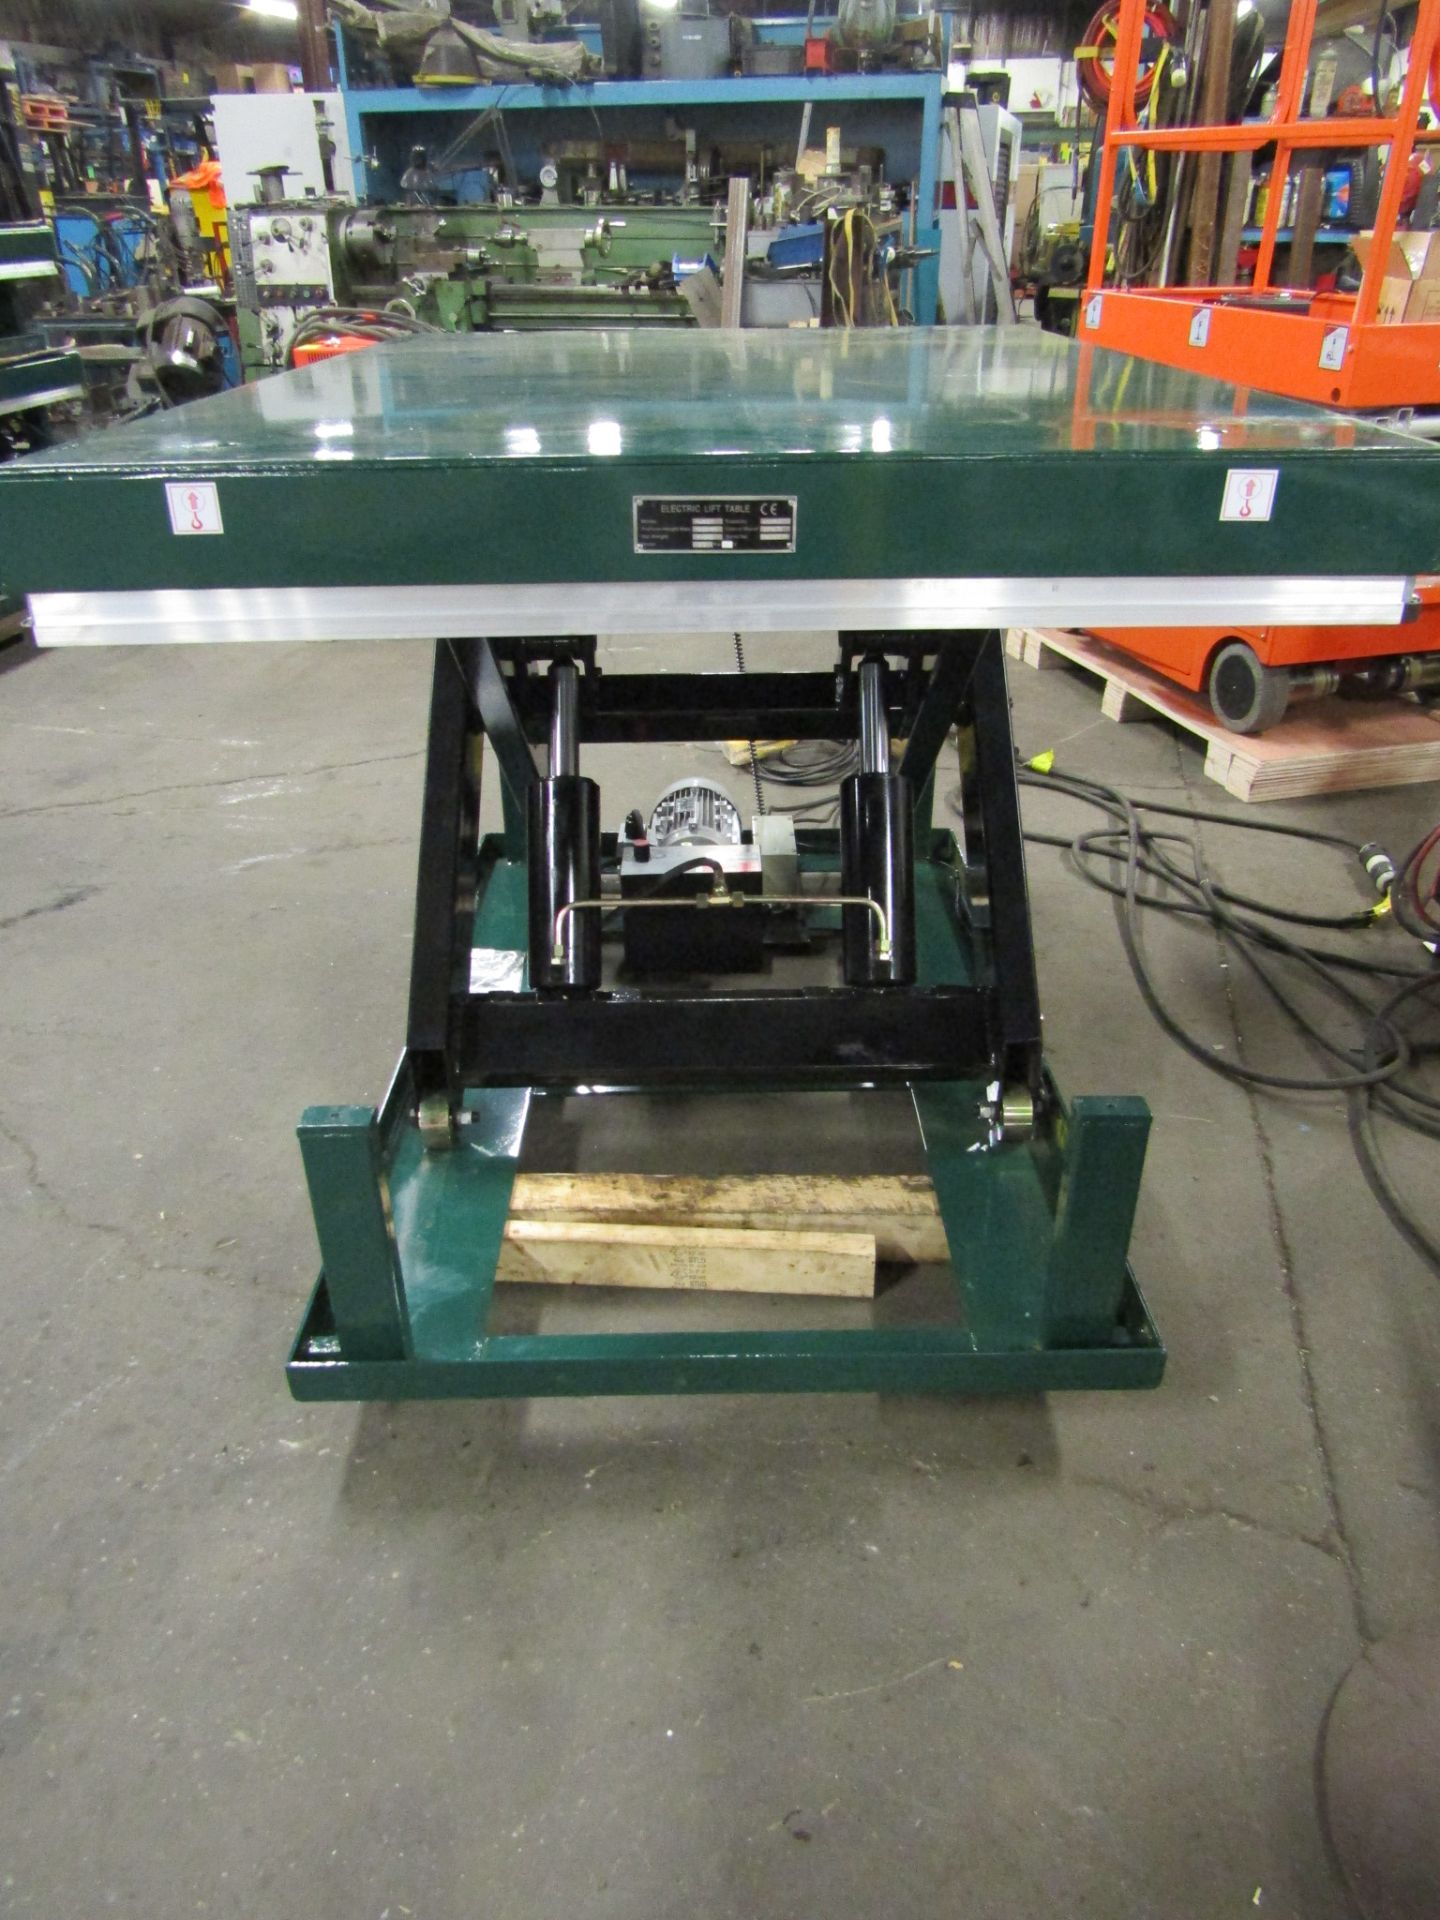 Omni Hydraulic Lift Table 47" x 67" x 42" lift - 13000lbs capacity - UNUSED and MINT - 220V 3 phase - Image 2 of 3